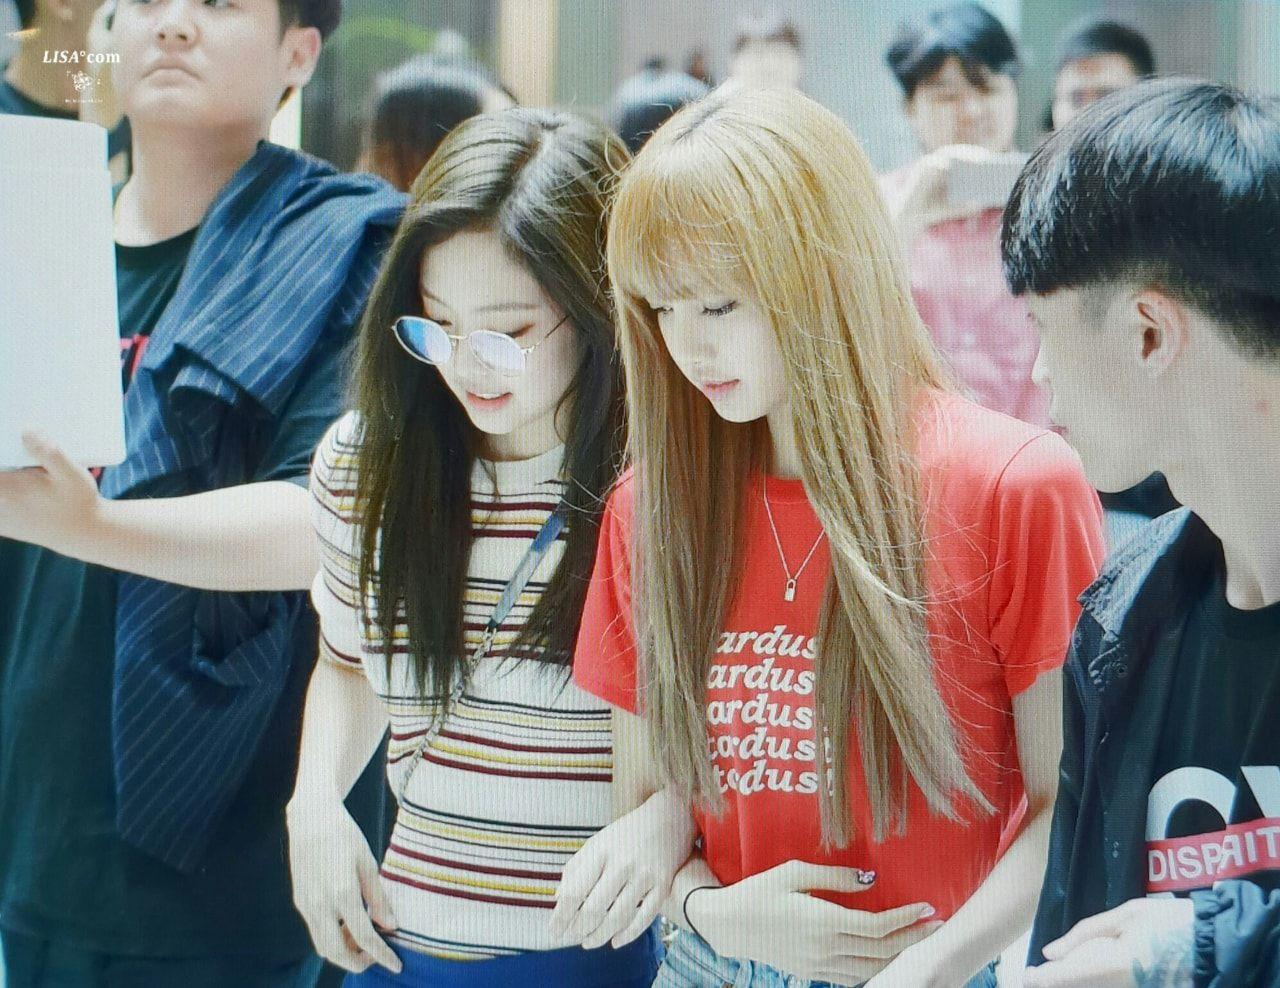 image about JENLISA. See more about lisa